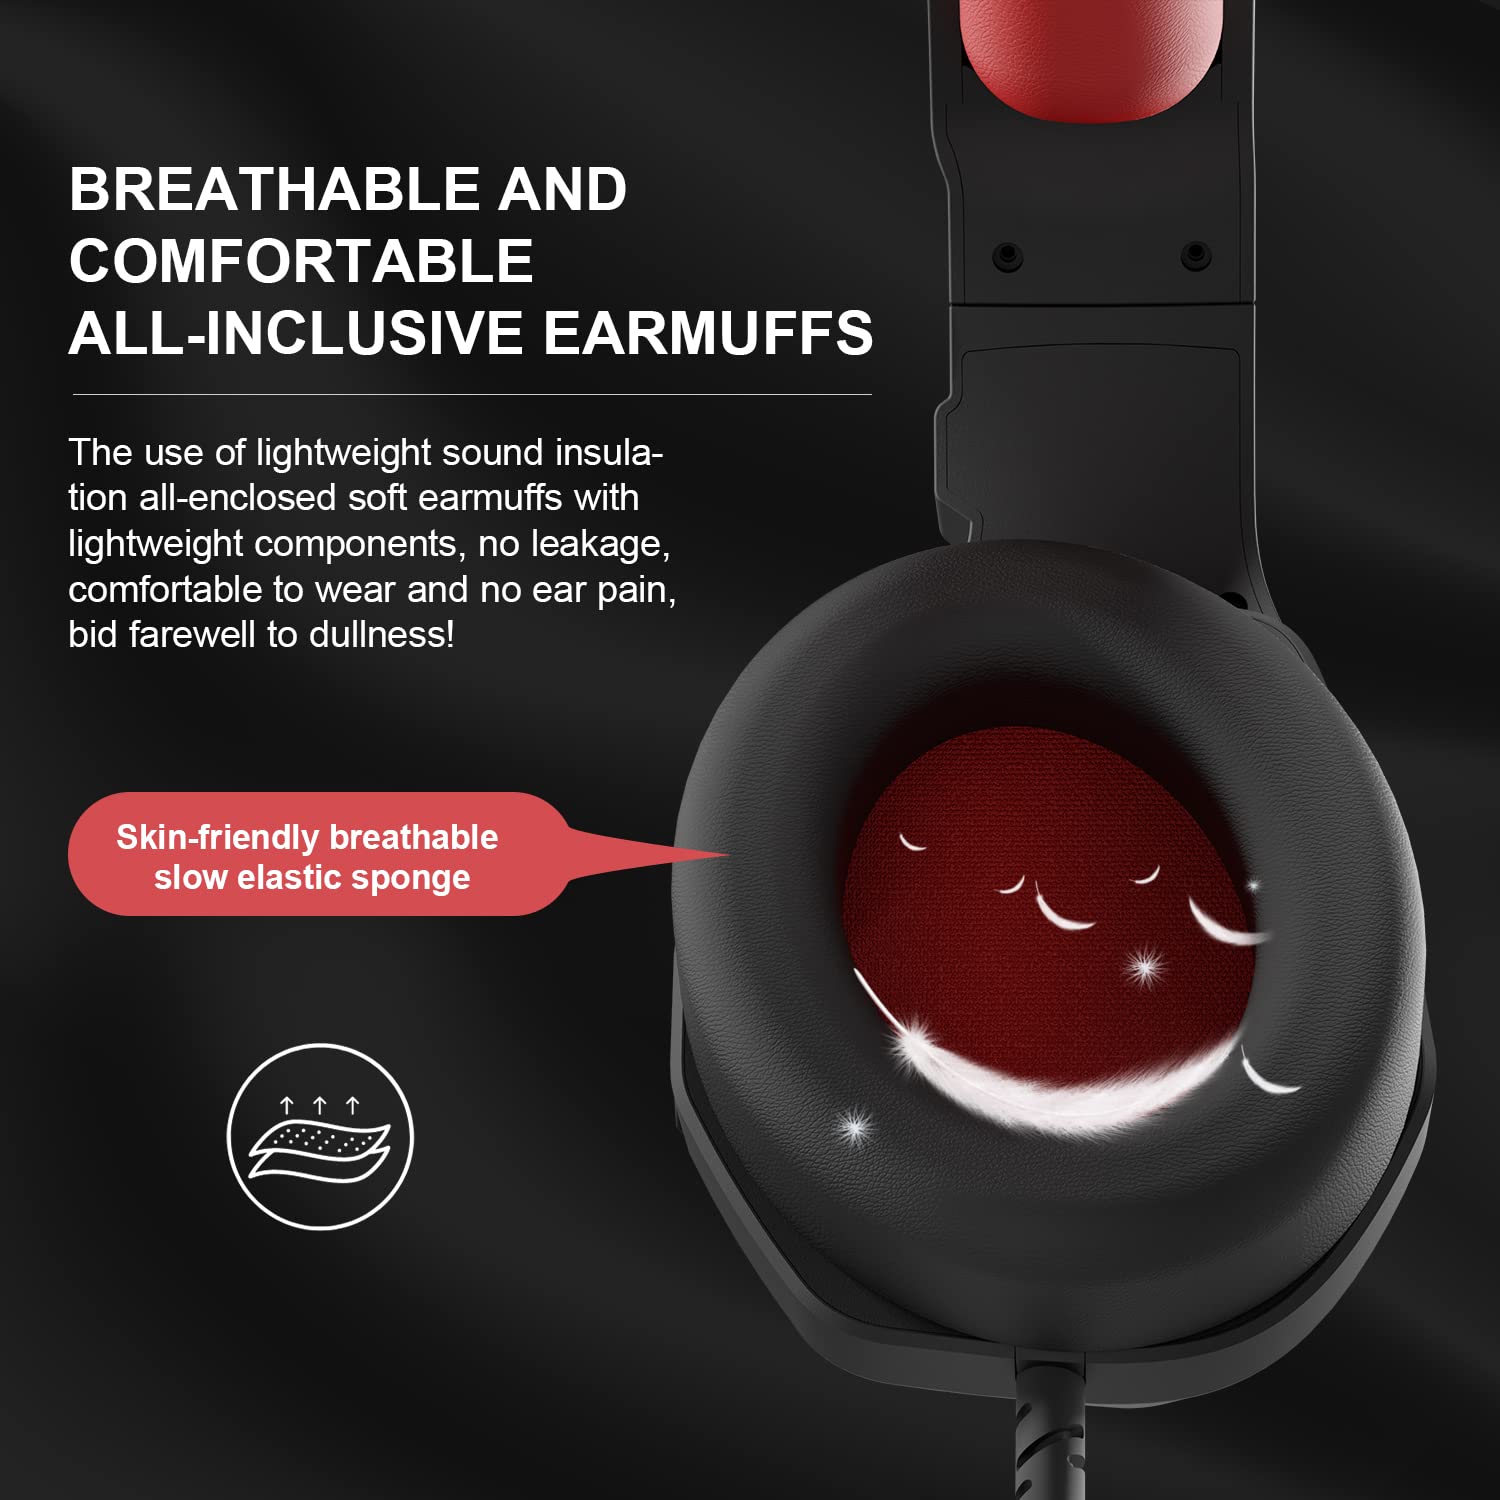 Gaming Headset Noise Cancelling Headphones with Microphone Kids and Adults 50mm Neodymium Drivers & 3.5mm Audio Jack Wired Over Ear Stereo Earphones for Online School/PC Game/Travel/Work Red